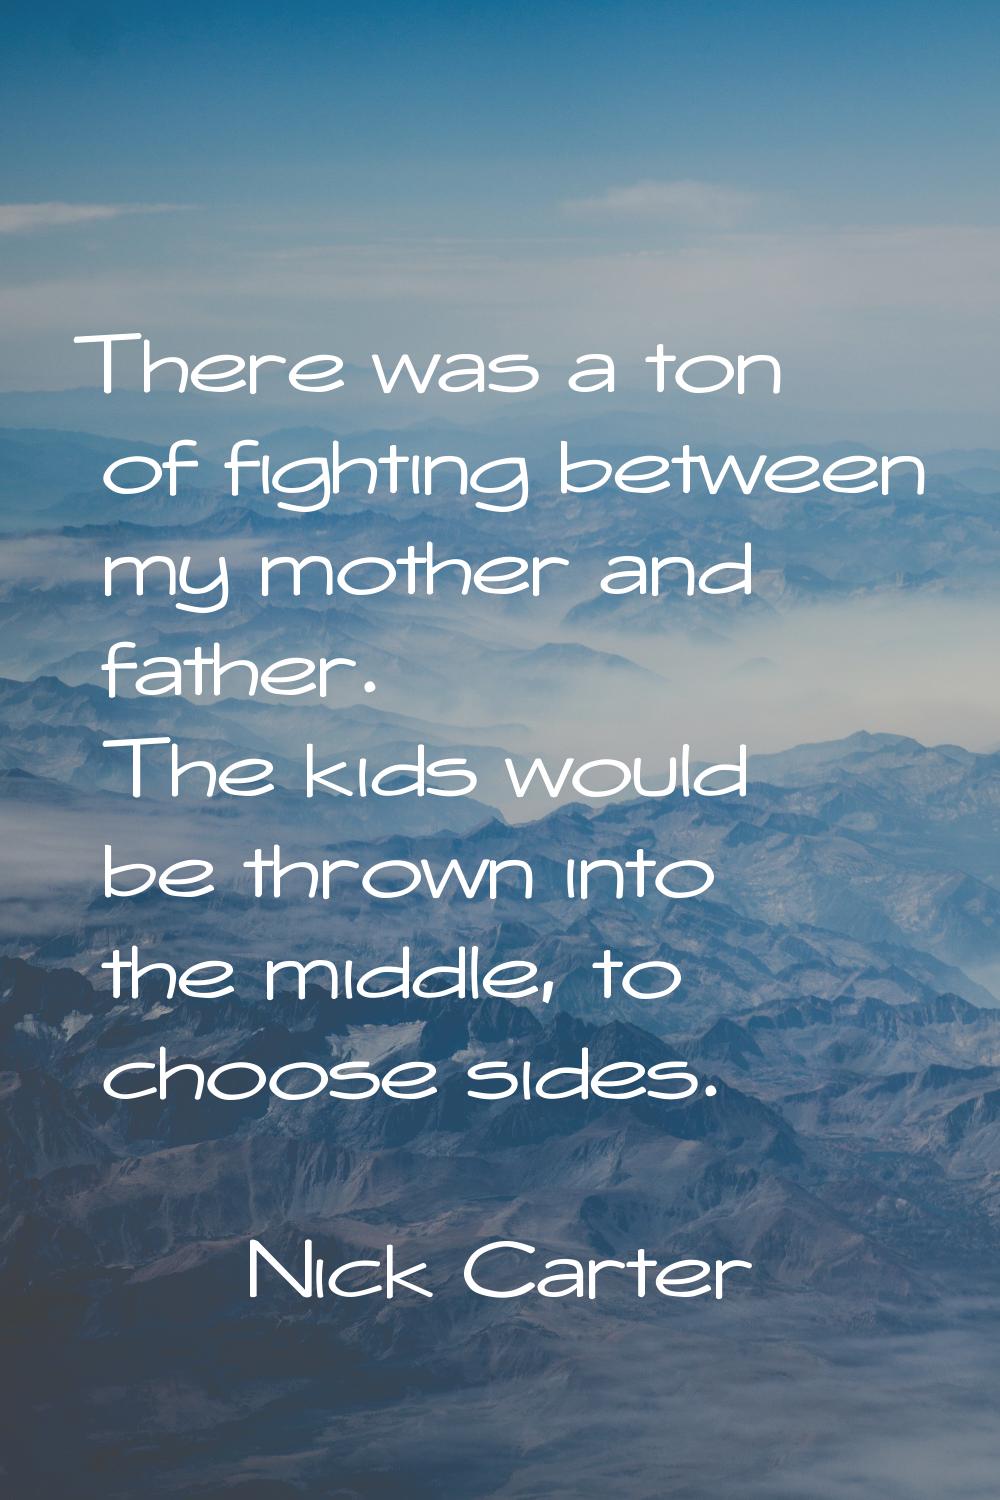 There was a ton of fighting between my mother and father. The kids would be thrown into the middle,